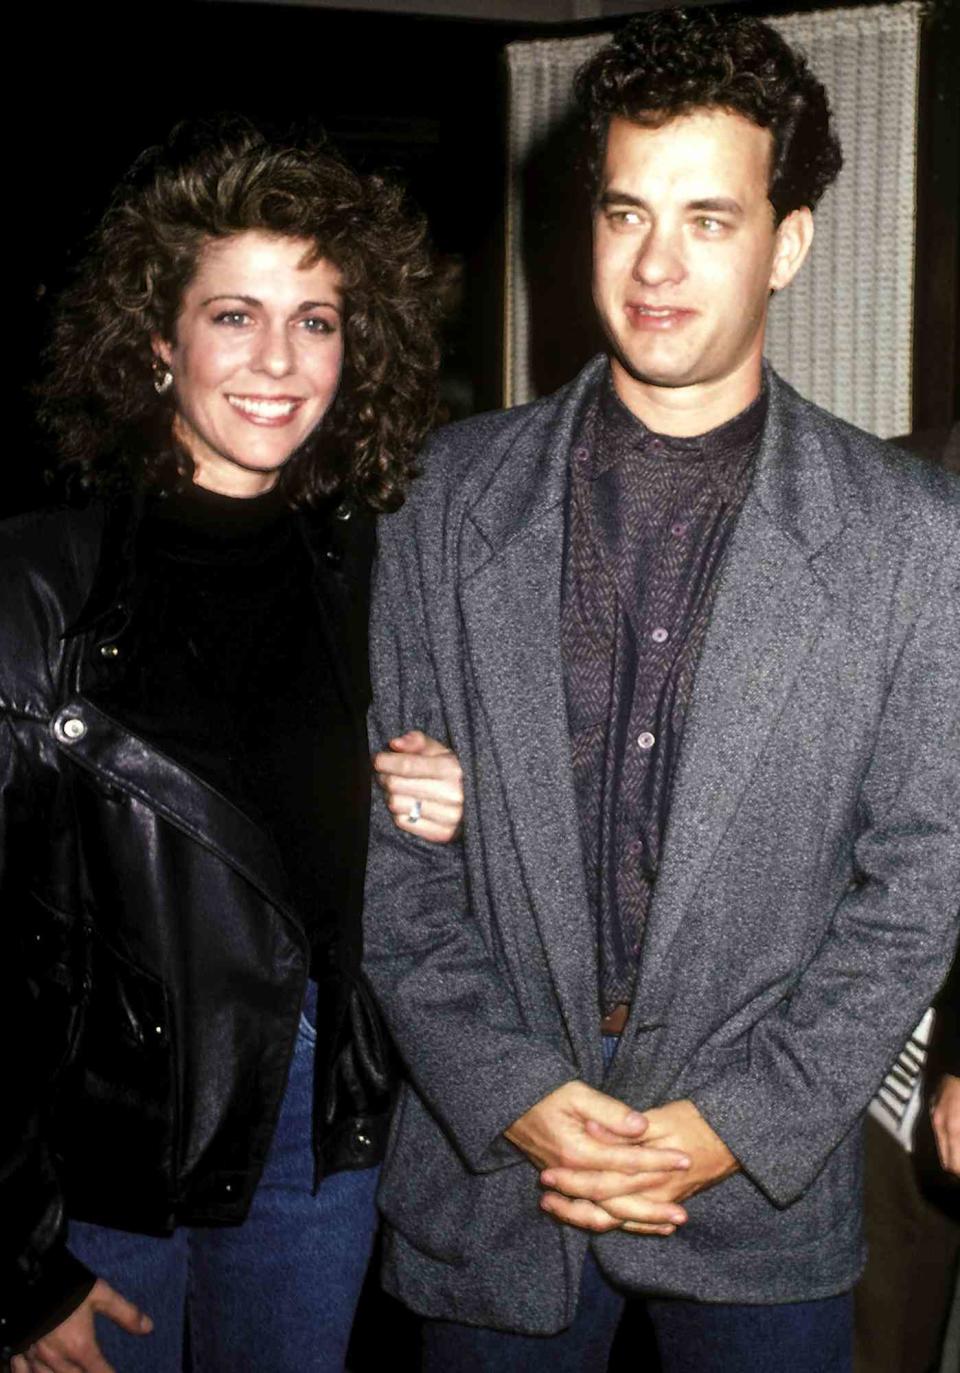 Rita Wilson and Tom Hanks attend the "Three Amigos" Beverly Hills Premiere on December 10, 1986 at the Academy Theatre in Beverly Hills, California